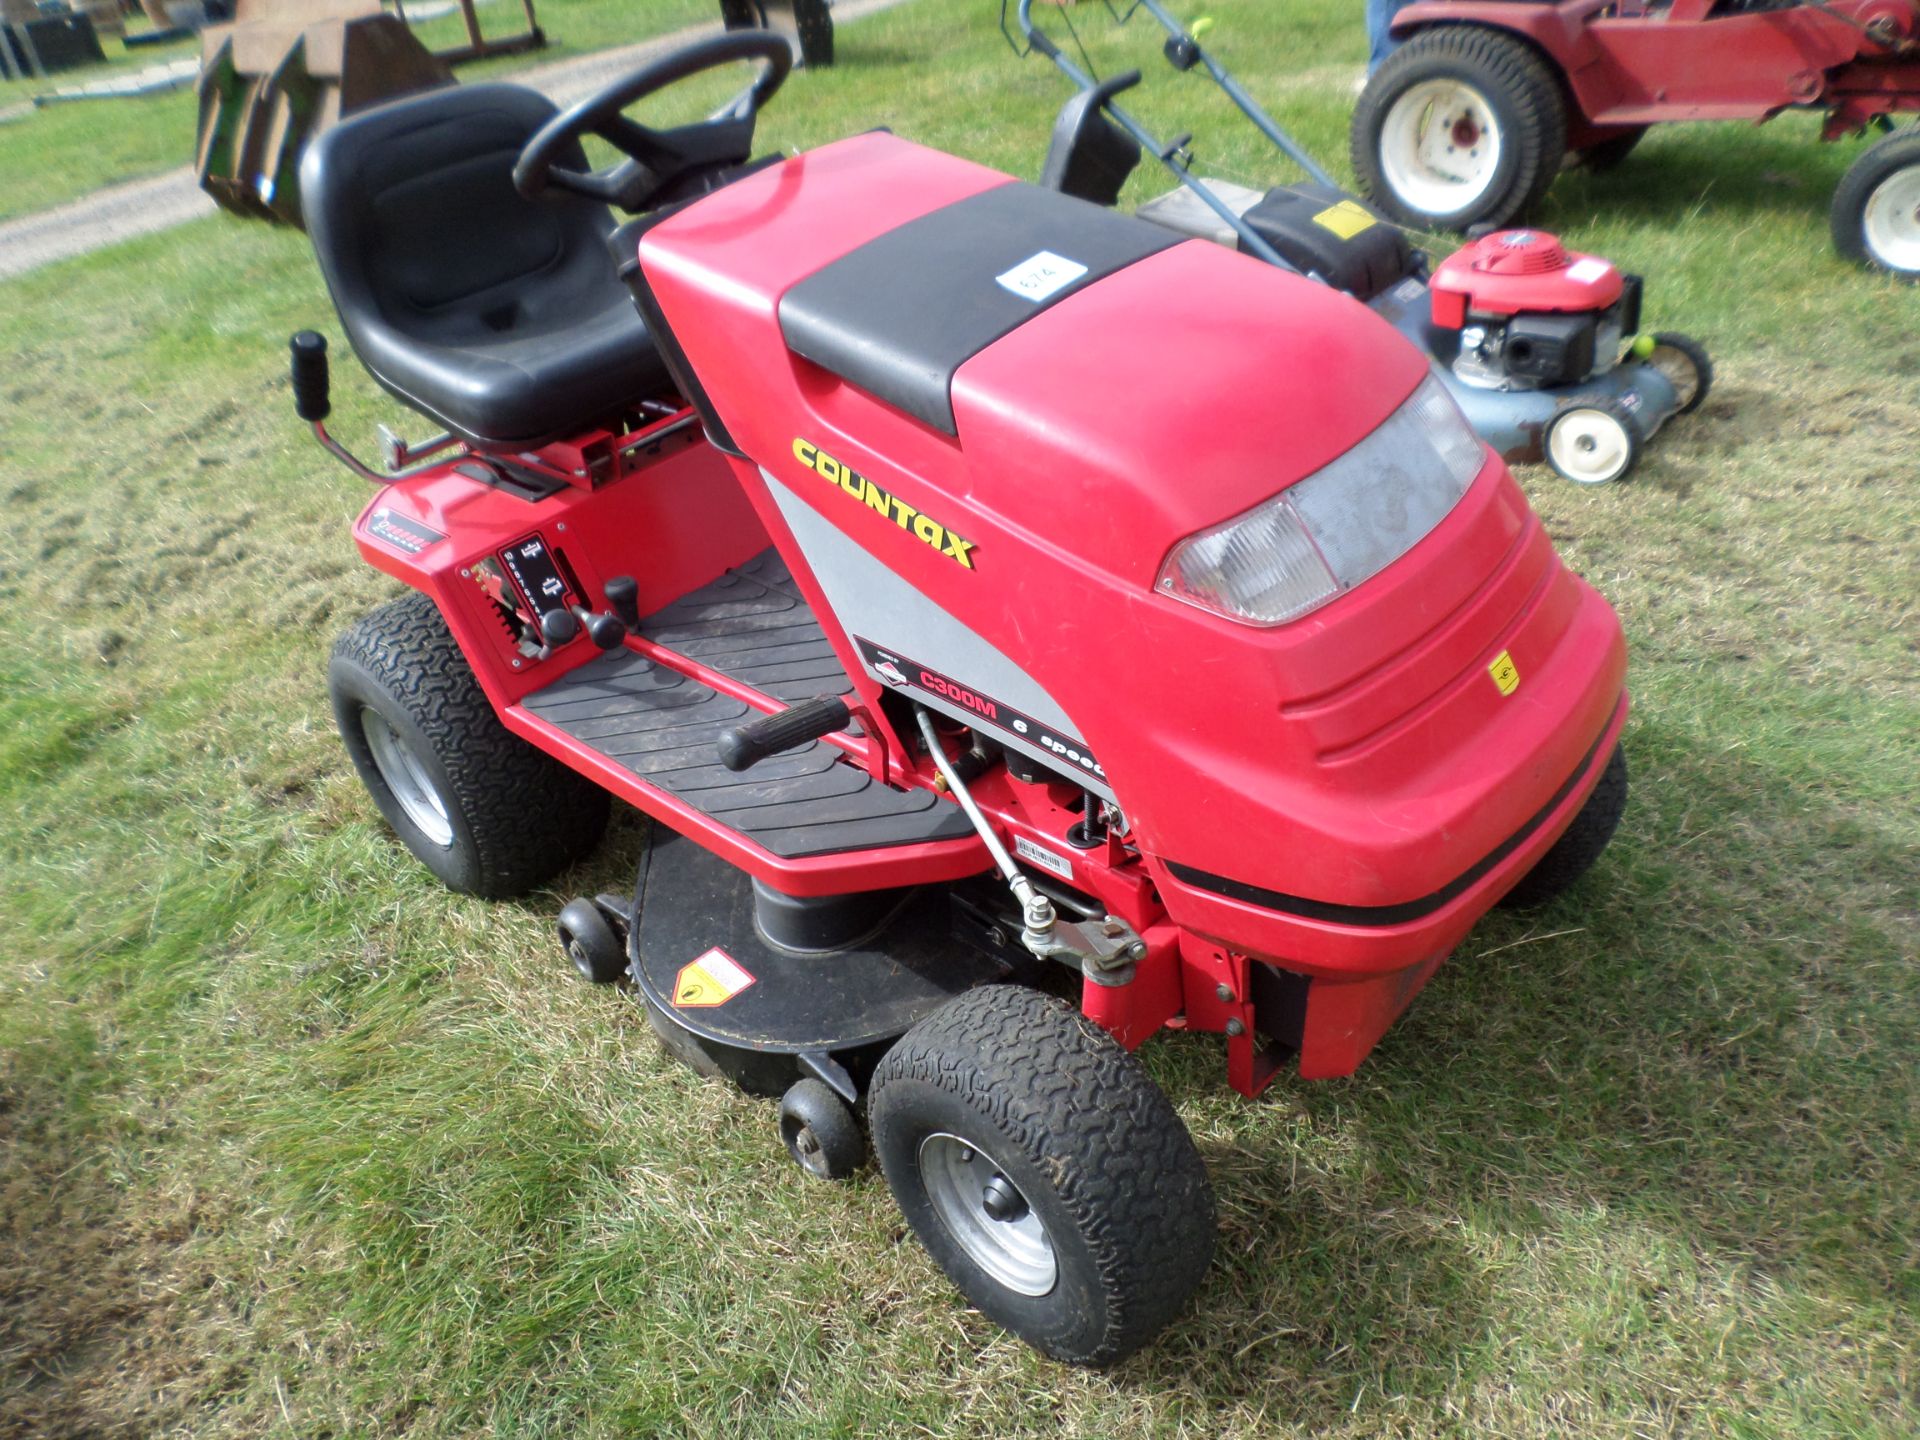 Countax C300M ride on mower, has had new replacement deck at some time, very clean original